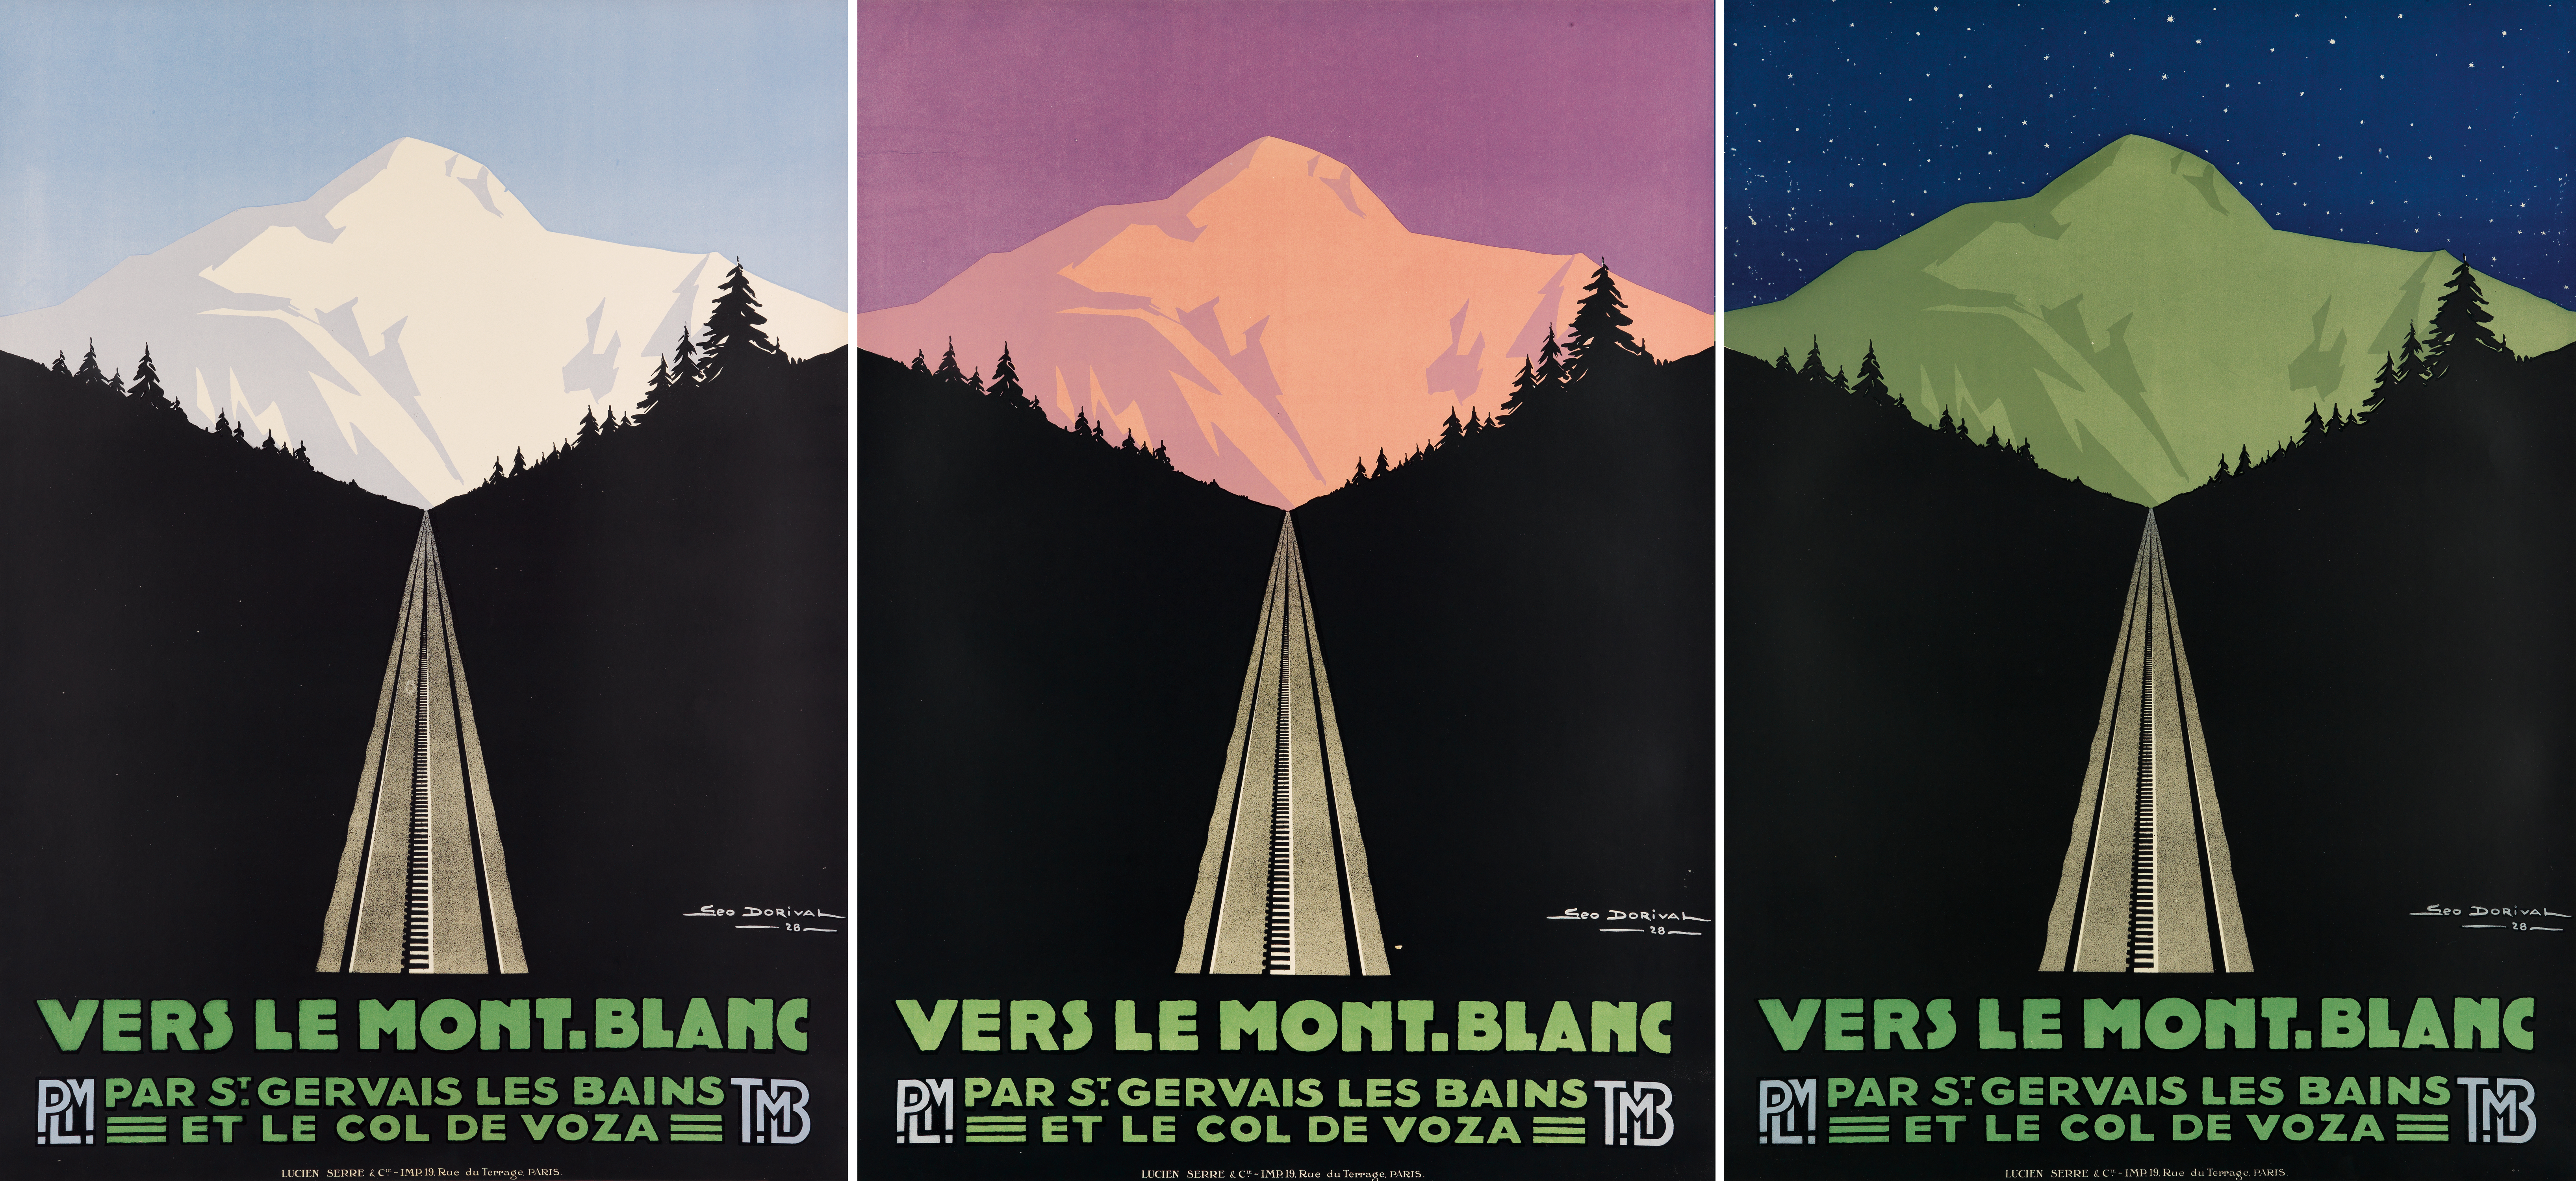 A triptych of posters touting the merits of Mont Blanc.